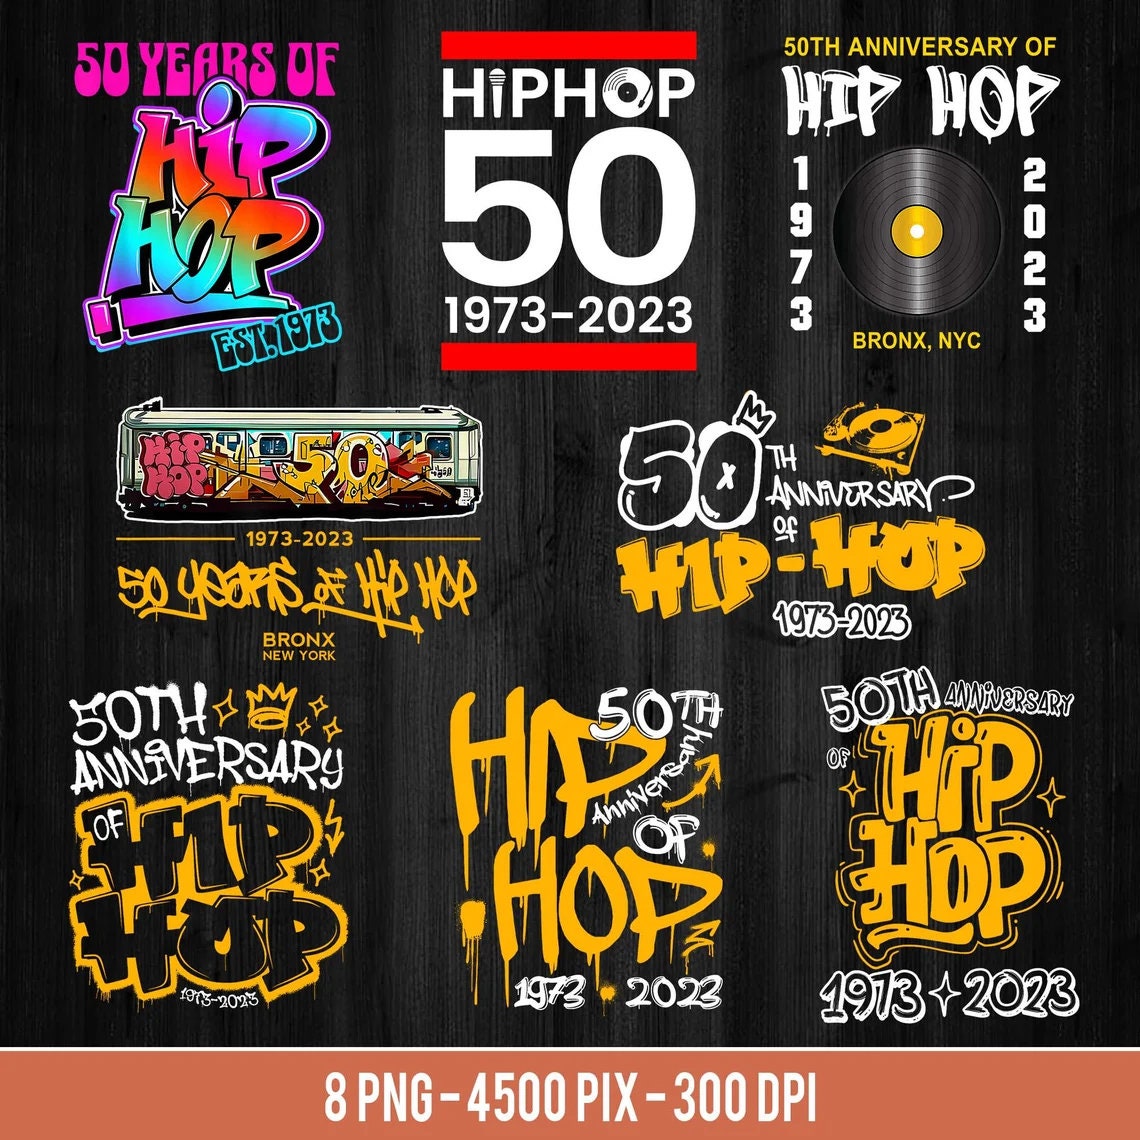 Hip Hop Graffiti Text and Dancer Design SVG Vector Cutting File / Clip Art  Available for Instant Download. 